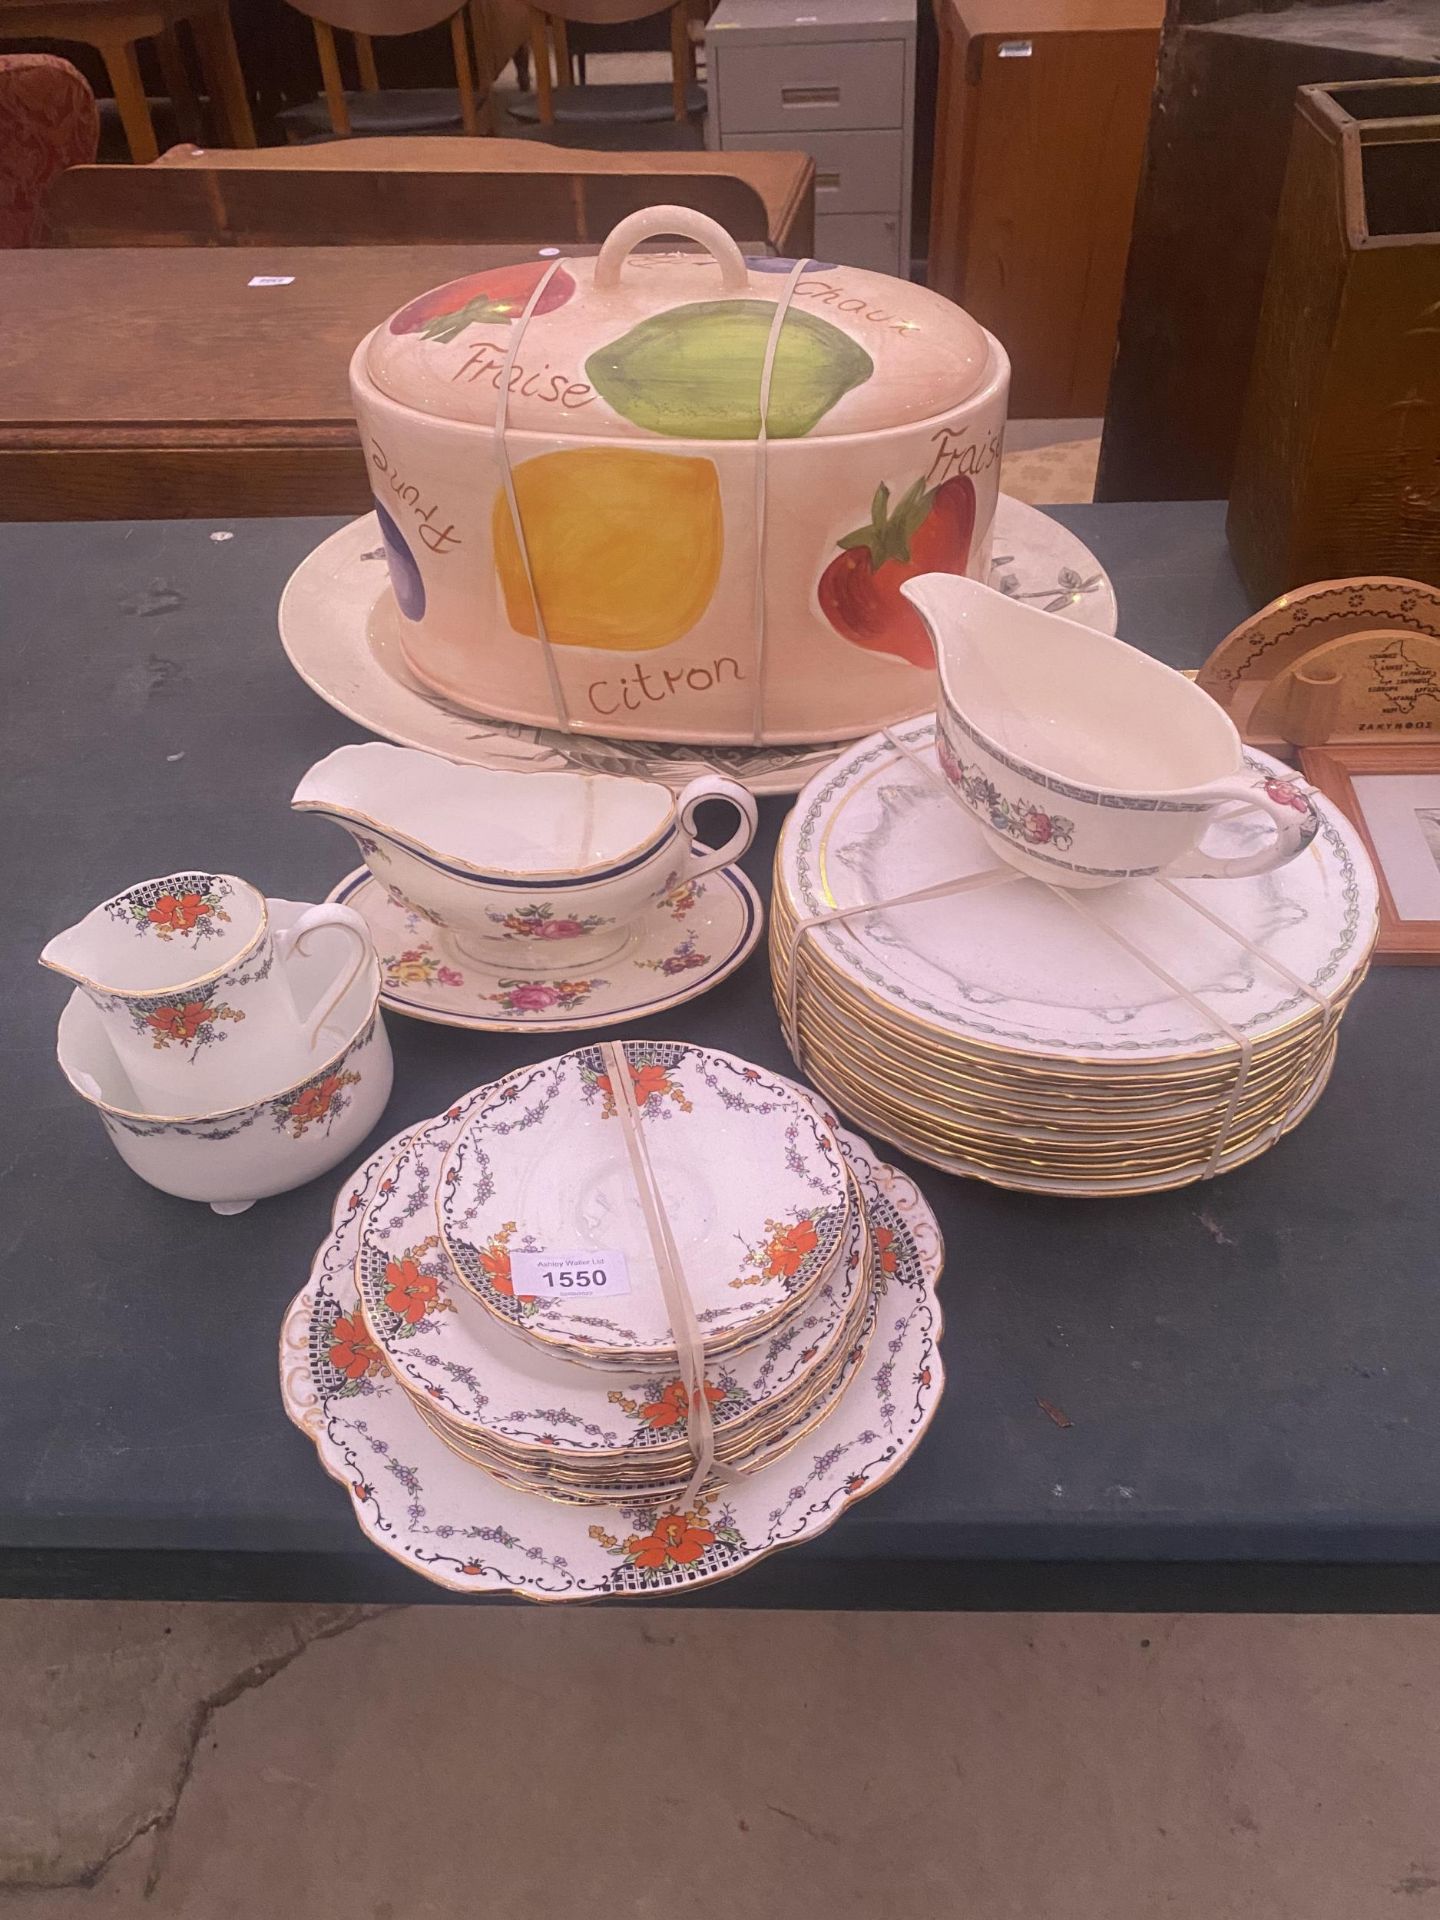 A LARGE COLLECTION OF CERAMIC WARE TO INCLUDE A LARGE BREAD BIN, TAYLOR & KENT PLATES AND TWO